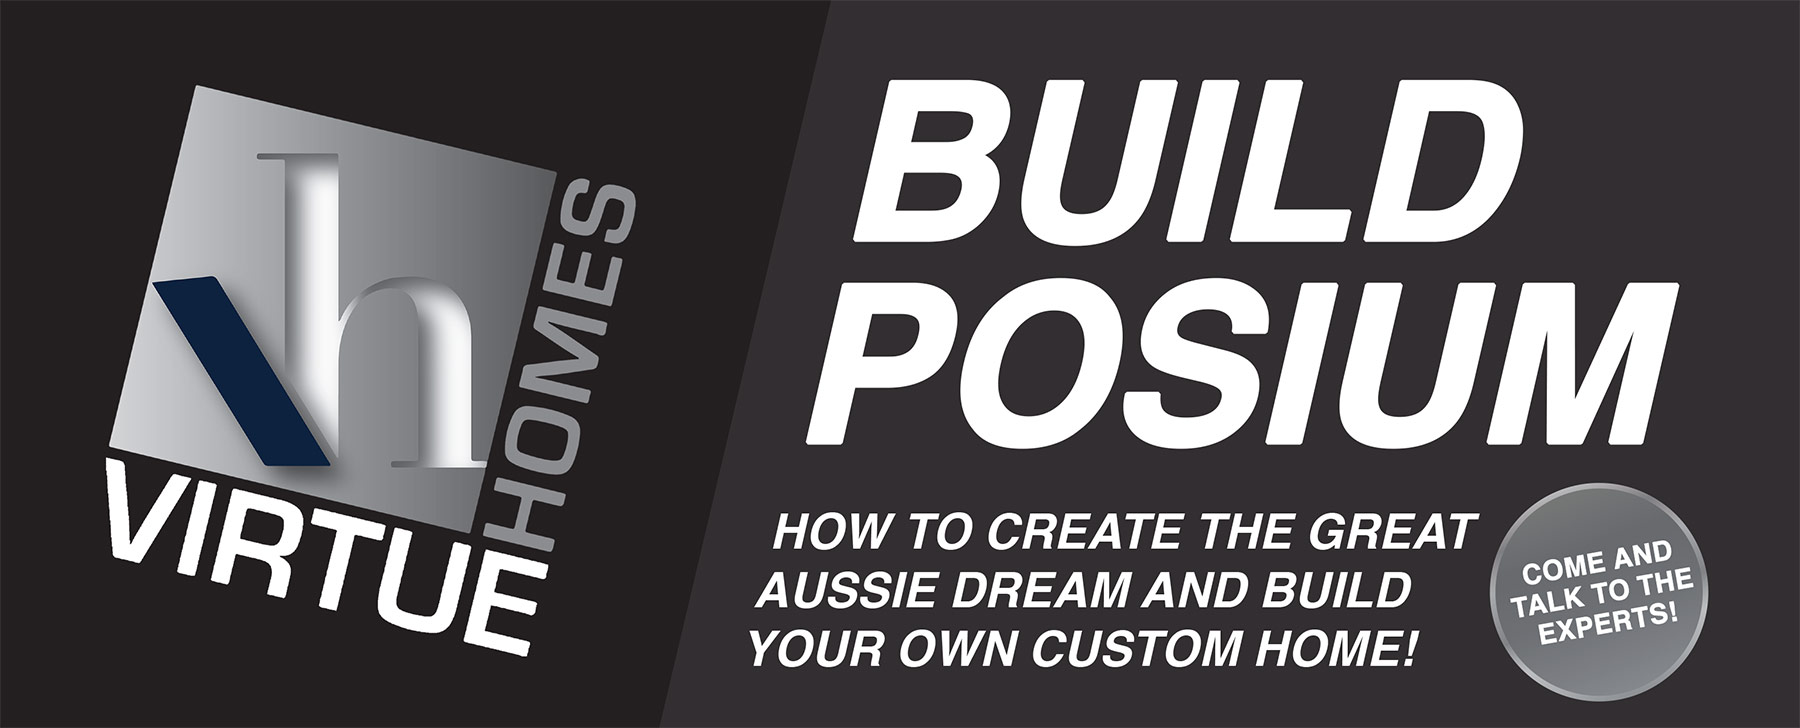 Black background with bold white text saying Build Posium - How to create the great aussie dream and build your own custom home